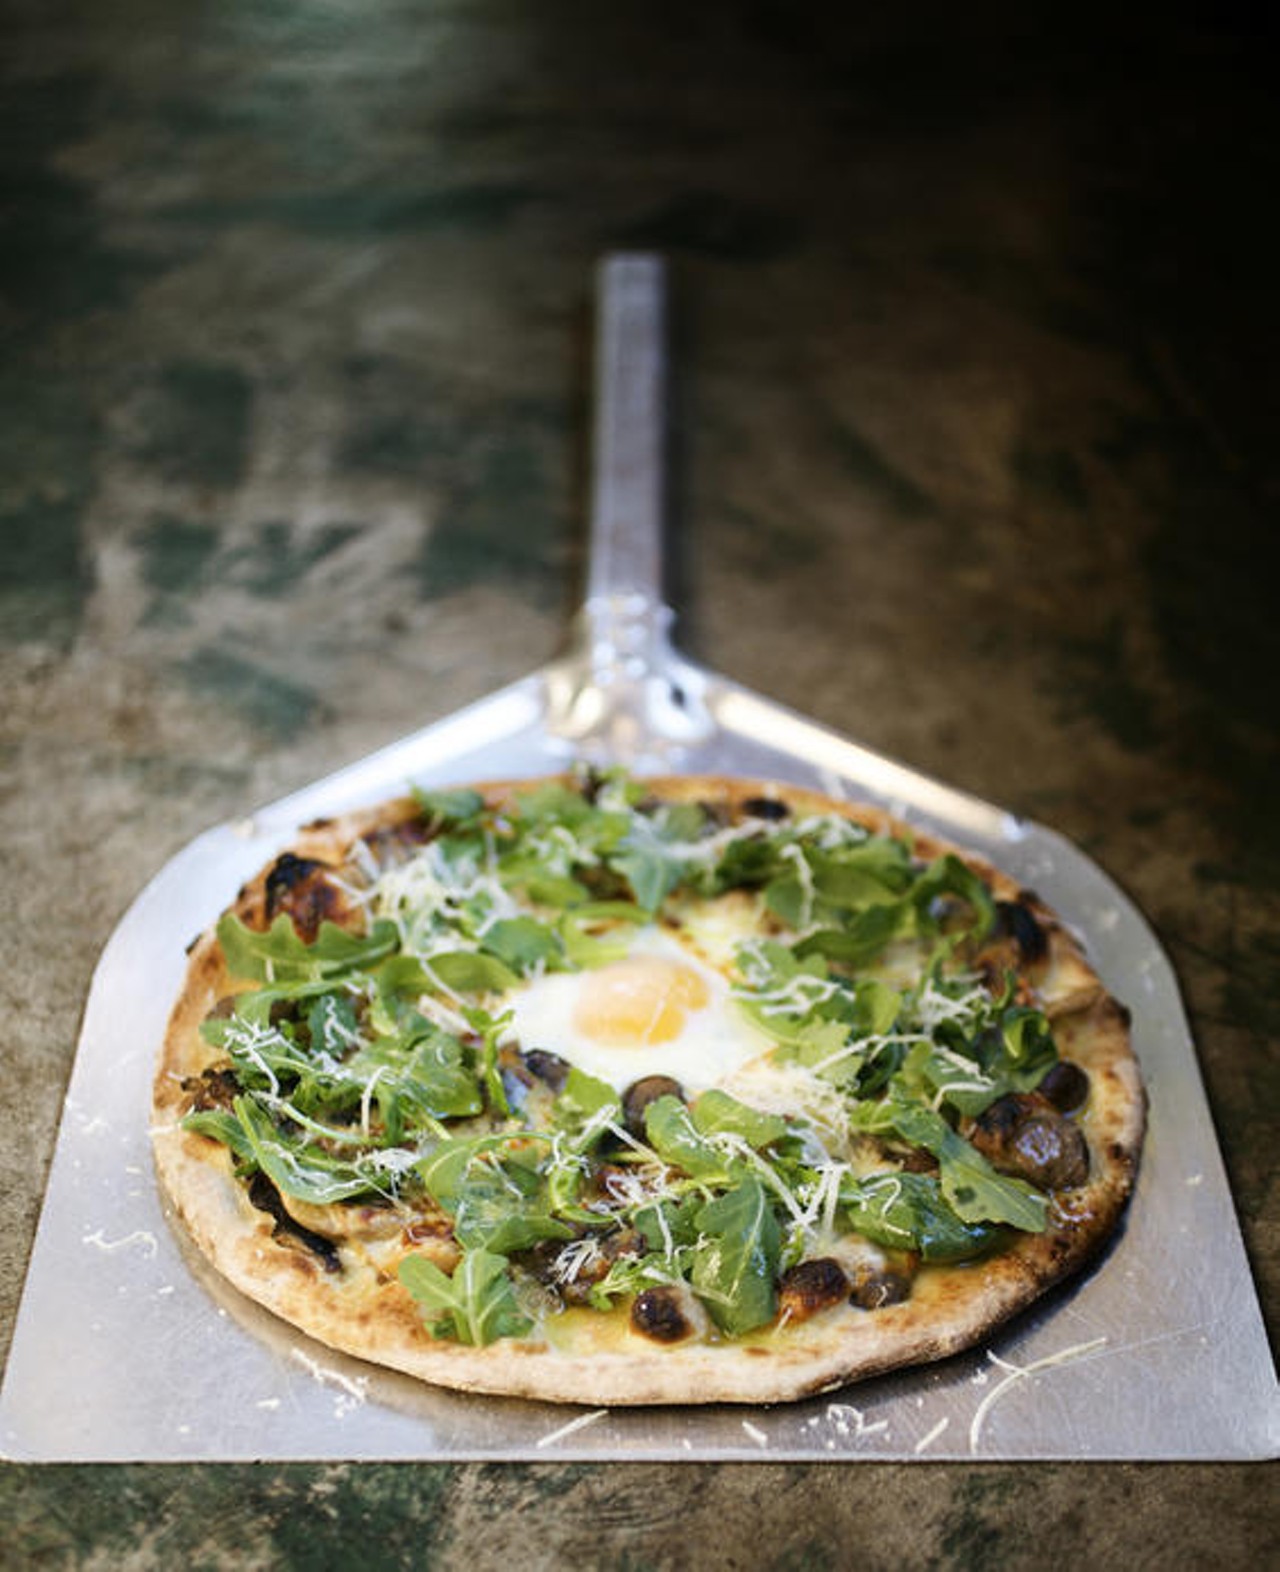 The Fungi Pizze is made with wild mushrooms, smoled mozzarella, garlic, basil, arugula, grana, olive oil, and you can add an egg for an additional fee. Any really...why wouldn't you?